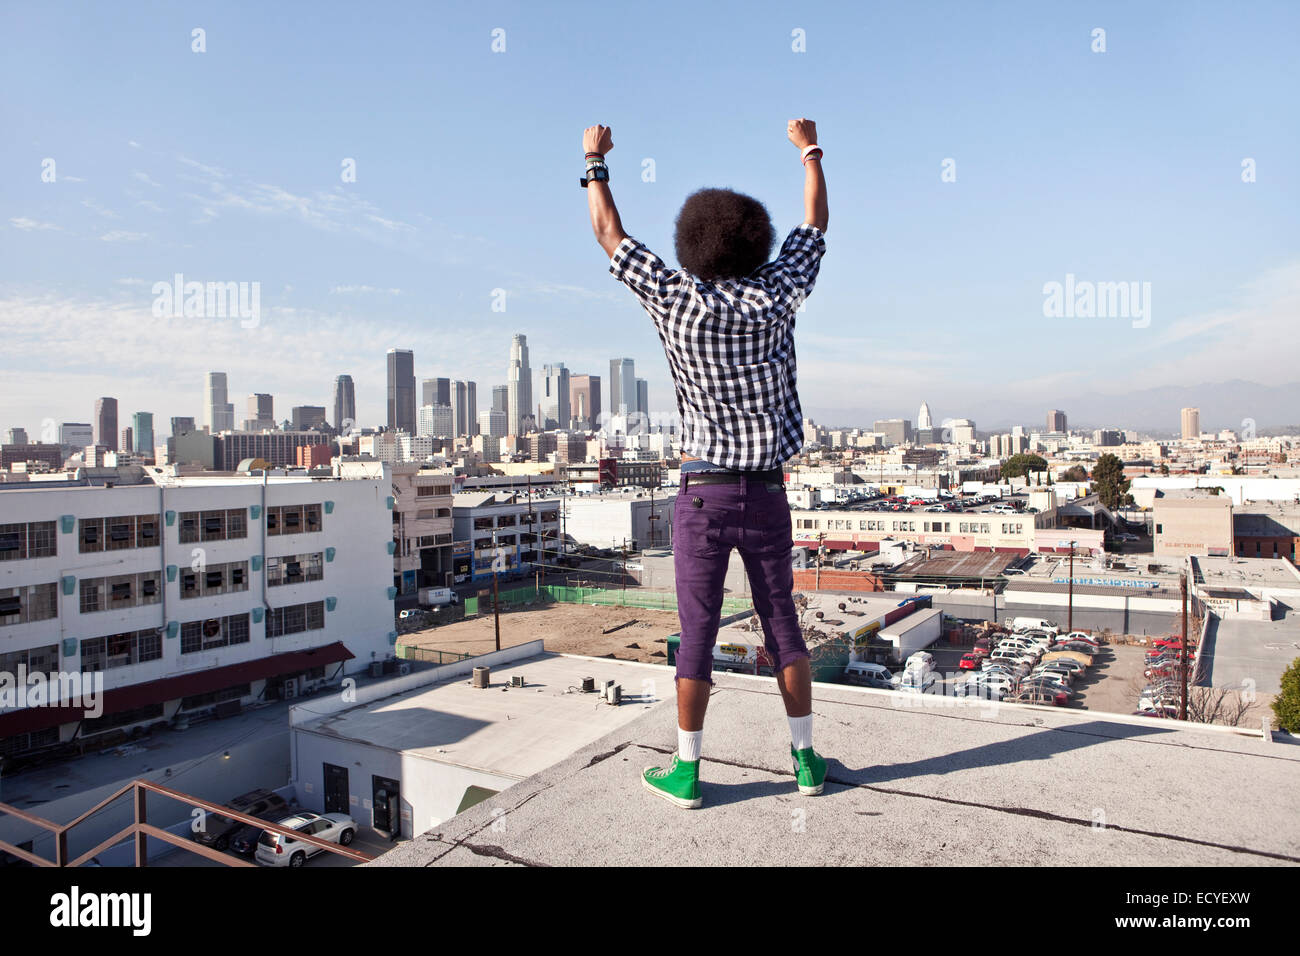 African American man overlooking cityscape from urban rooftop Stock Photo